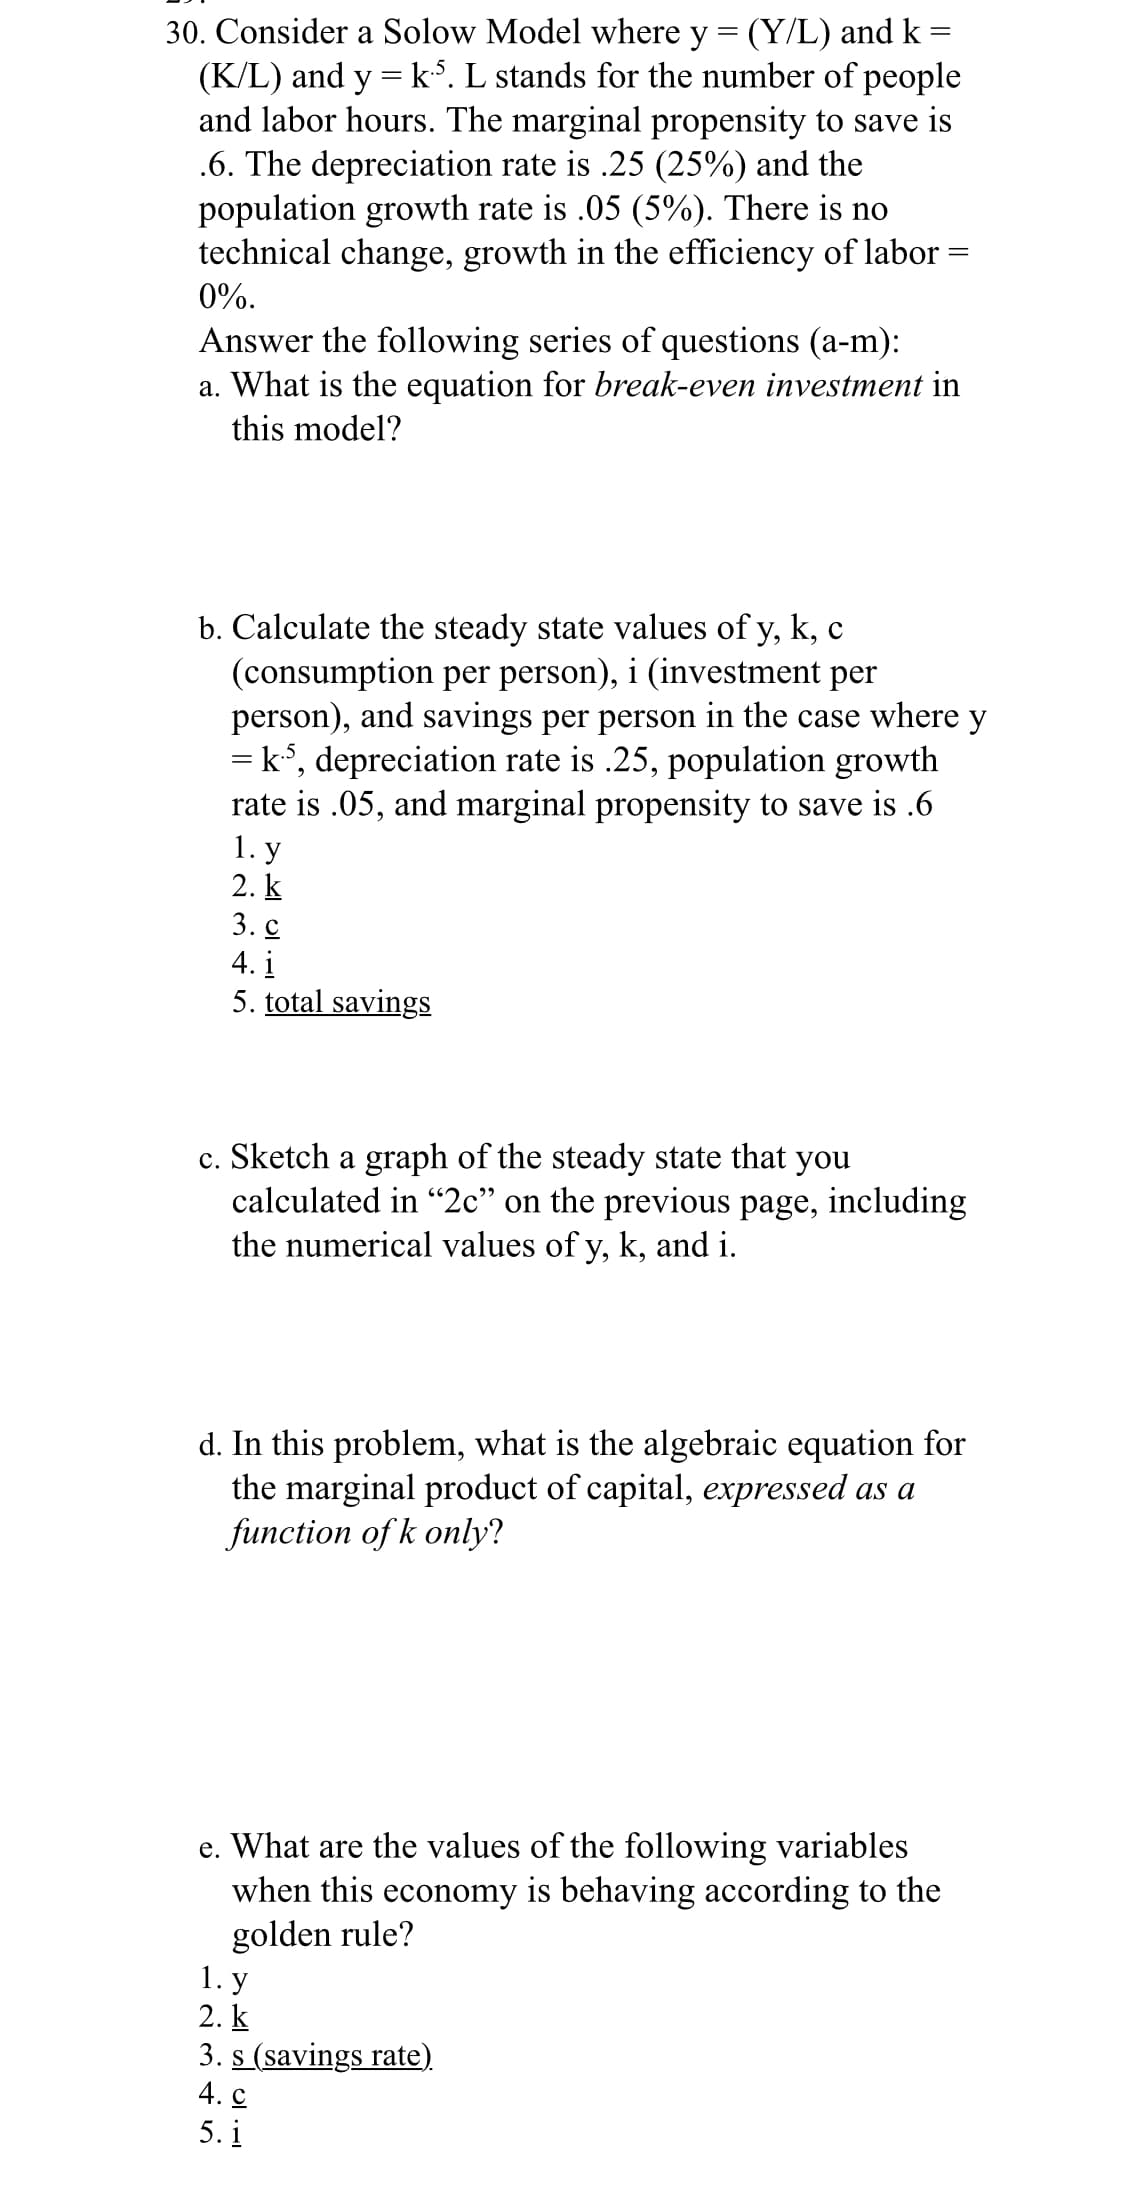 30. Consider a Solow Model where y = (Y/L) and k =
(K/L) and y = k.5. L stands for the number of people
and labor hours. The marginal propensity to save is
.6. The depreciation rate is .25 (25%) and the
population growth rate is .05 (5%). There is no
technical change, growth in the efficiency of labor
0%.
Answer the following series of questions (a-m):
a. What is the equation for break-even investment in
this model?
b. Calculate the steady state values of y, k, c
(consumption per person), i (investment per
person), and savings per person in the case where y
= k³, depreciation rate is .25, population growth
rate is .05, and marginal propensity to save is .6
1. y
2. k
3.c
4. i
5. total savings
c. Sketch a graph of the steady state that you
calculated in "2c" on the previous page, including
the numerical values of y, k, and i.
d. In this problem, what is the algebraic equation for
the marginal product of capital, expressed as a
function of k only?
e. What are the values of the following variables
when this economy is behaving according to the
golden rule?
1. y
2. k
3. s (savings rate).
4. C
5.1